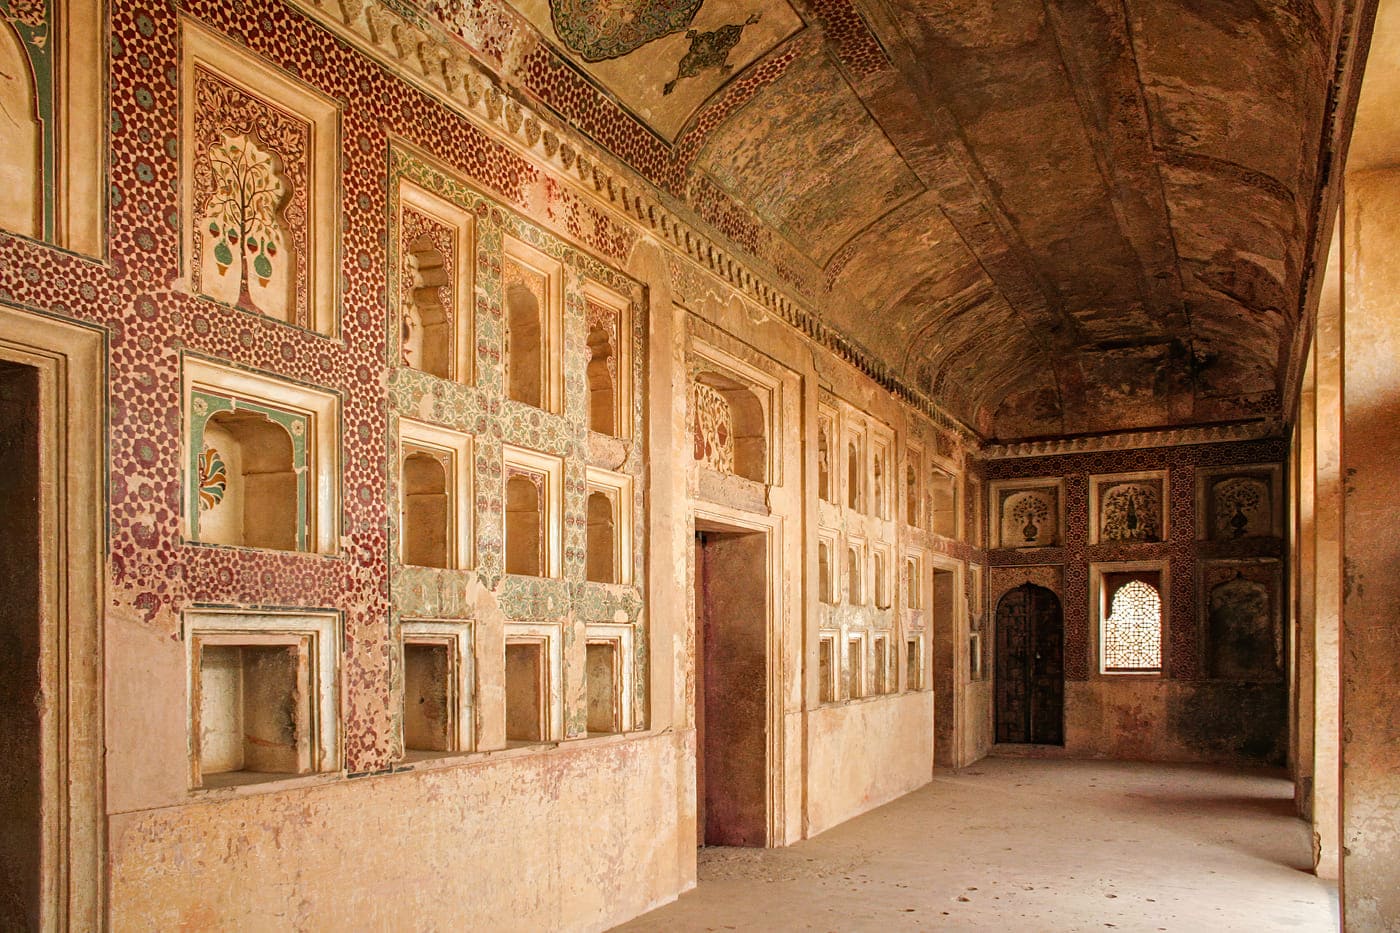 While some spots have given into the trap of time, the walls still tell a tale of royalty with exceptional decoration work which was carried out by local artisans at the time of construction, Madhya Pradesh 